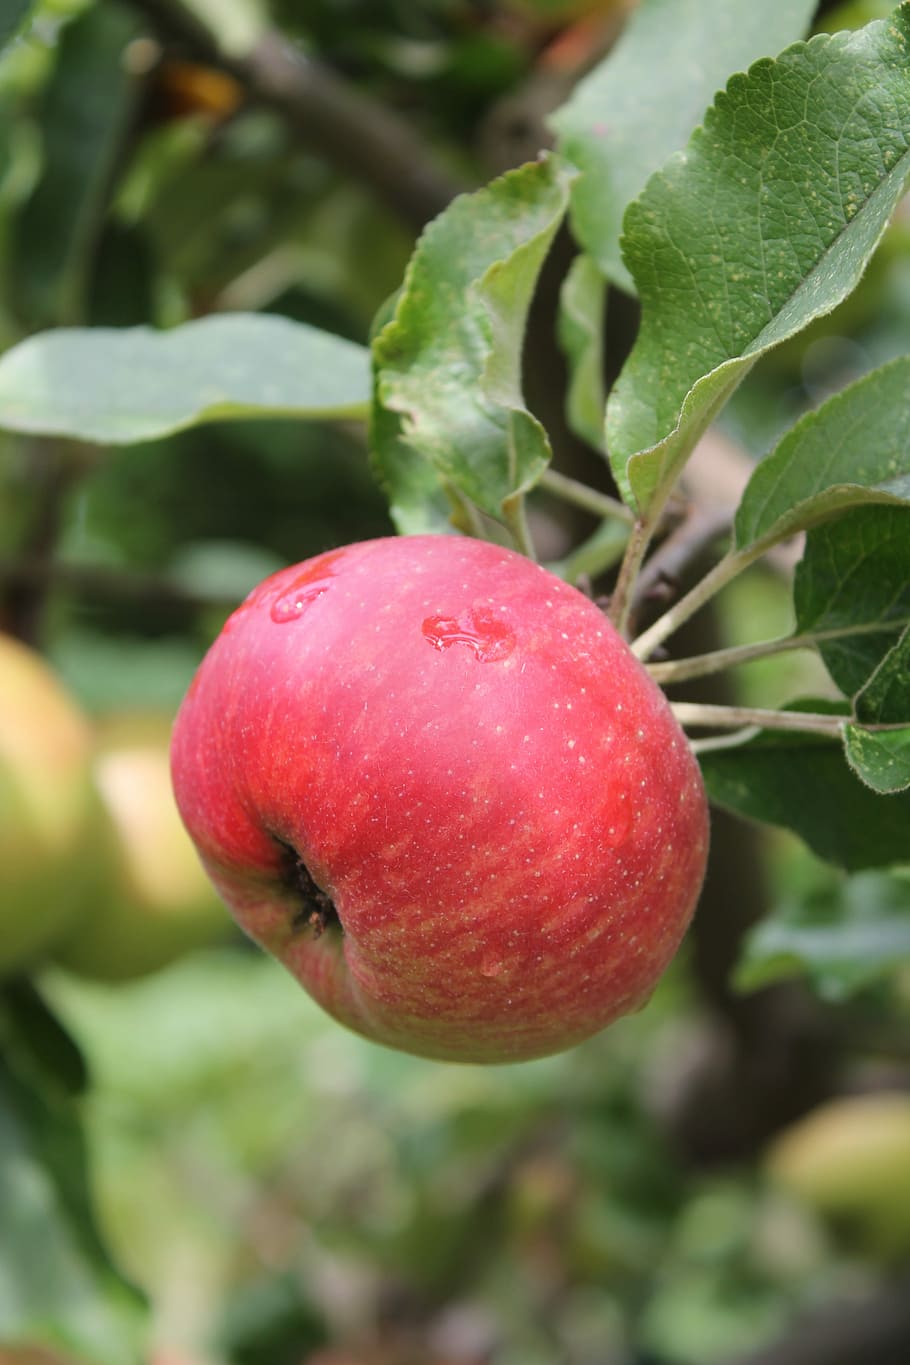 Apple, Tree, apple, tree, summer, red, food and drink, fruit, agriculture, healthy eating, freshness